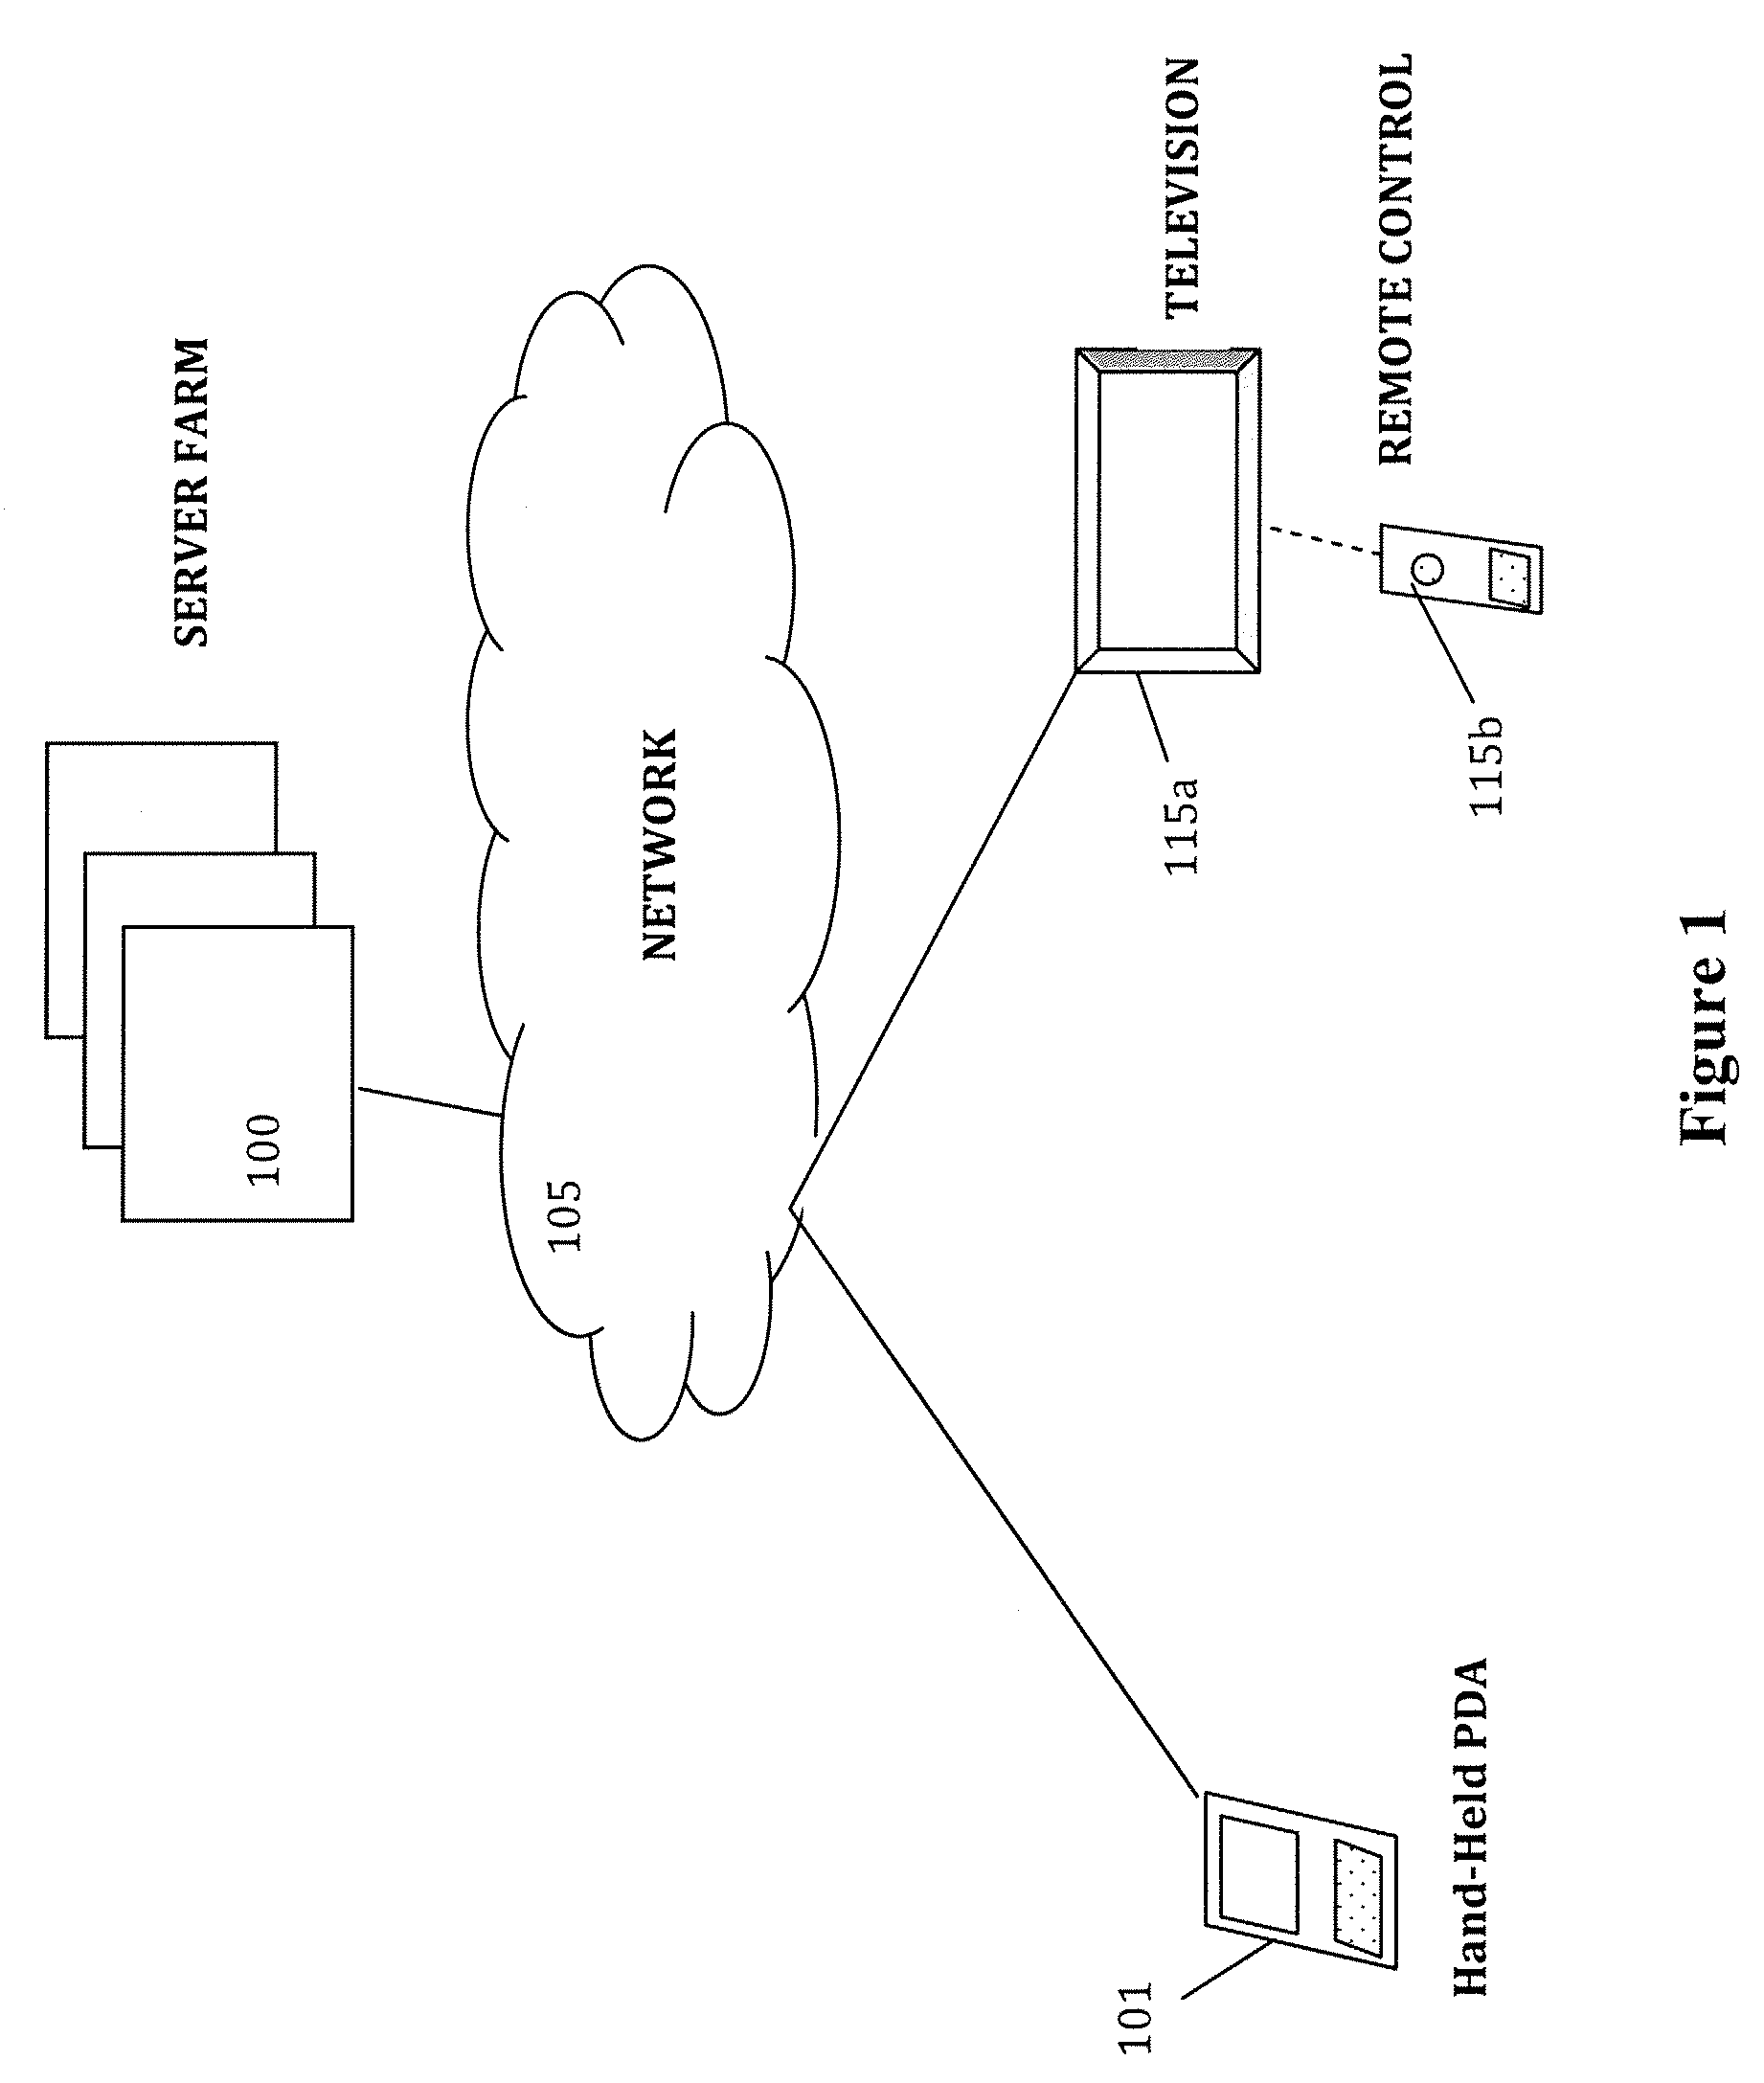 System and method for text disambiguation and context designation in incremental search